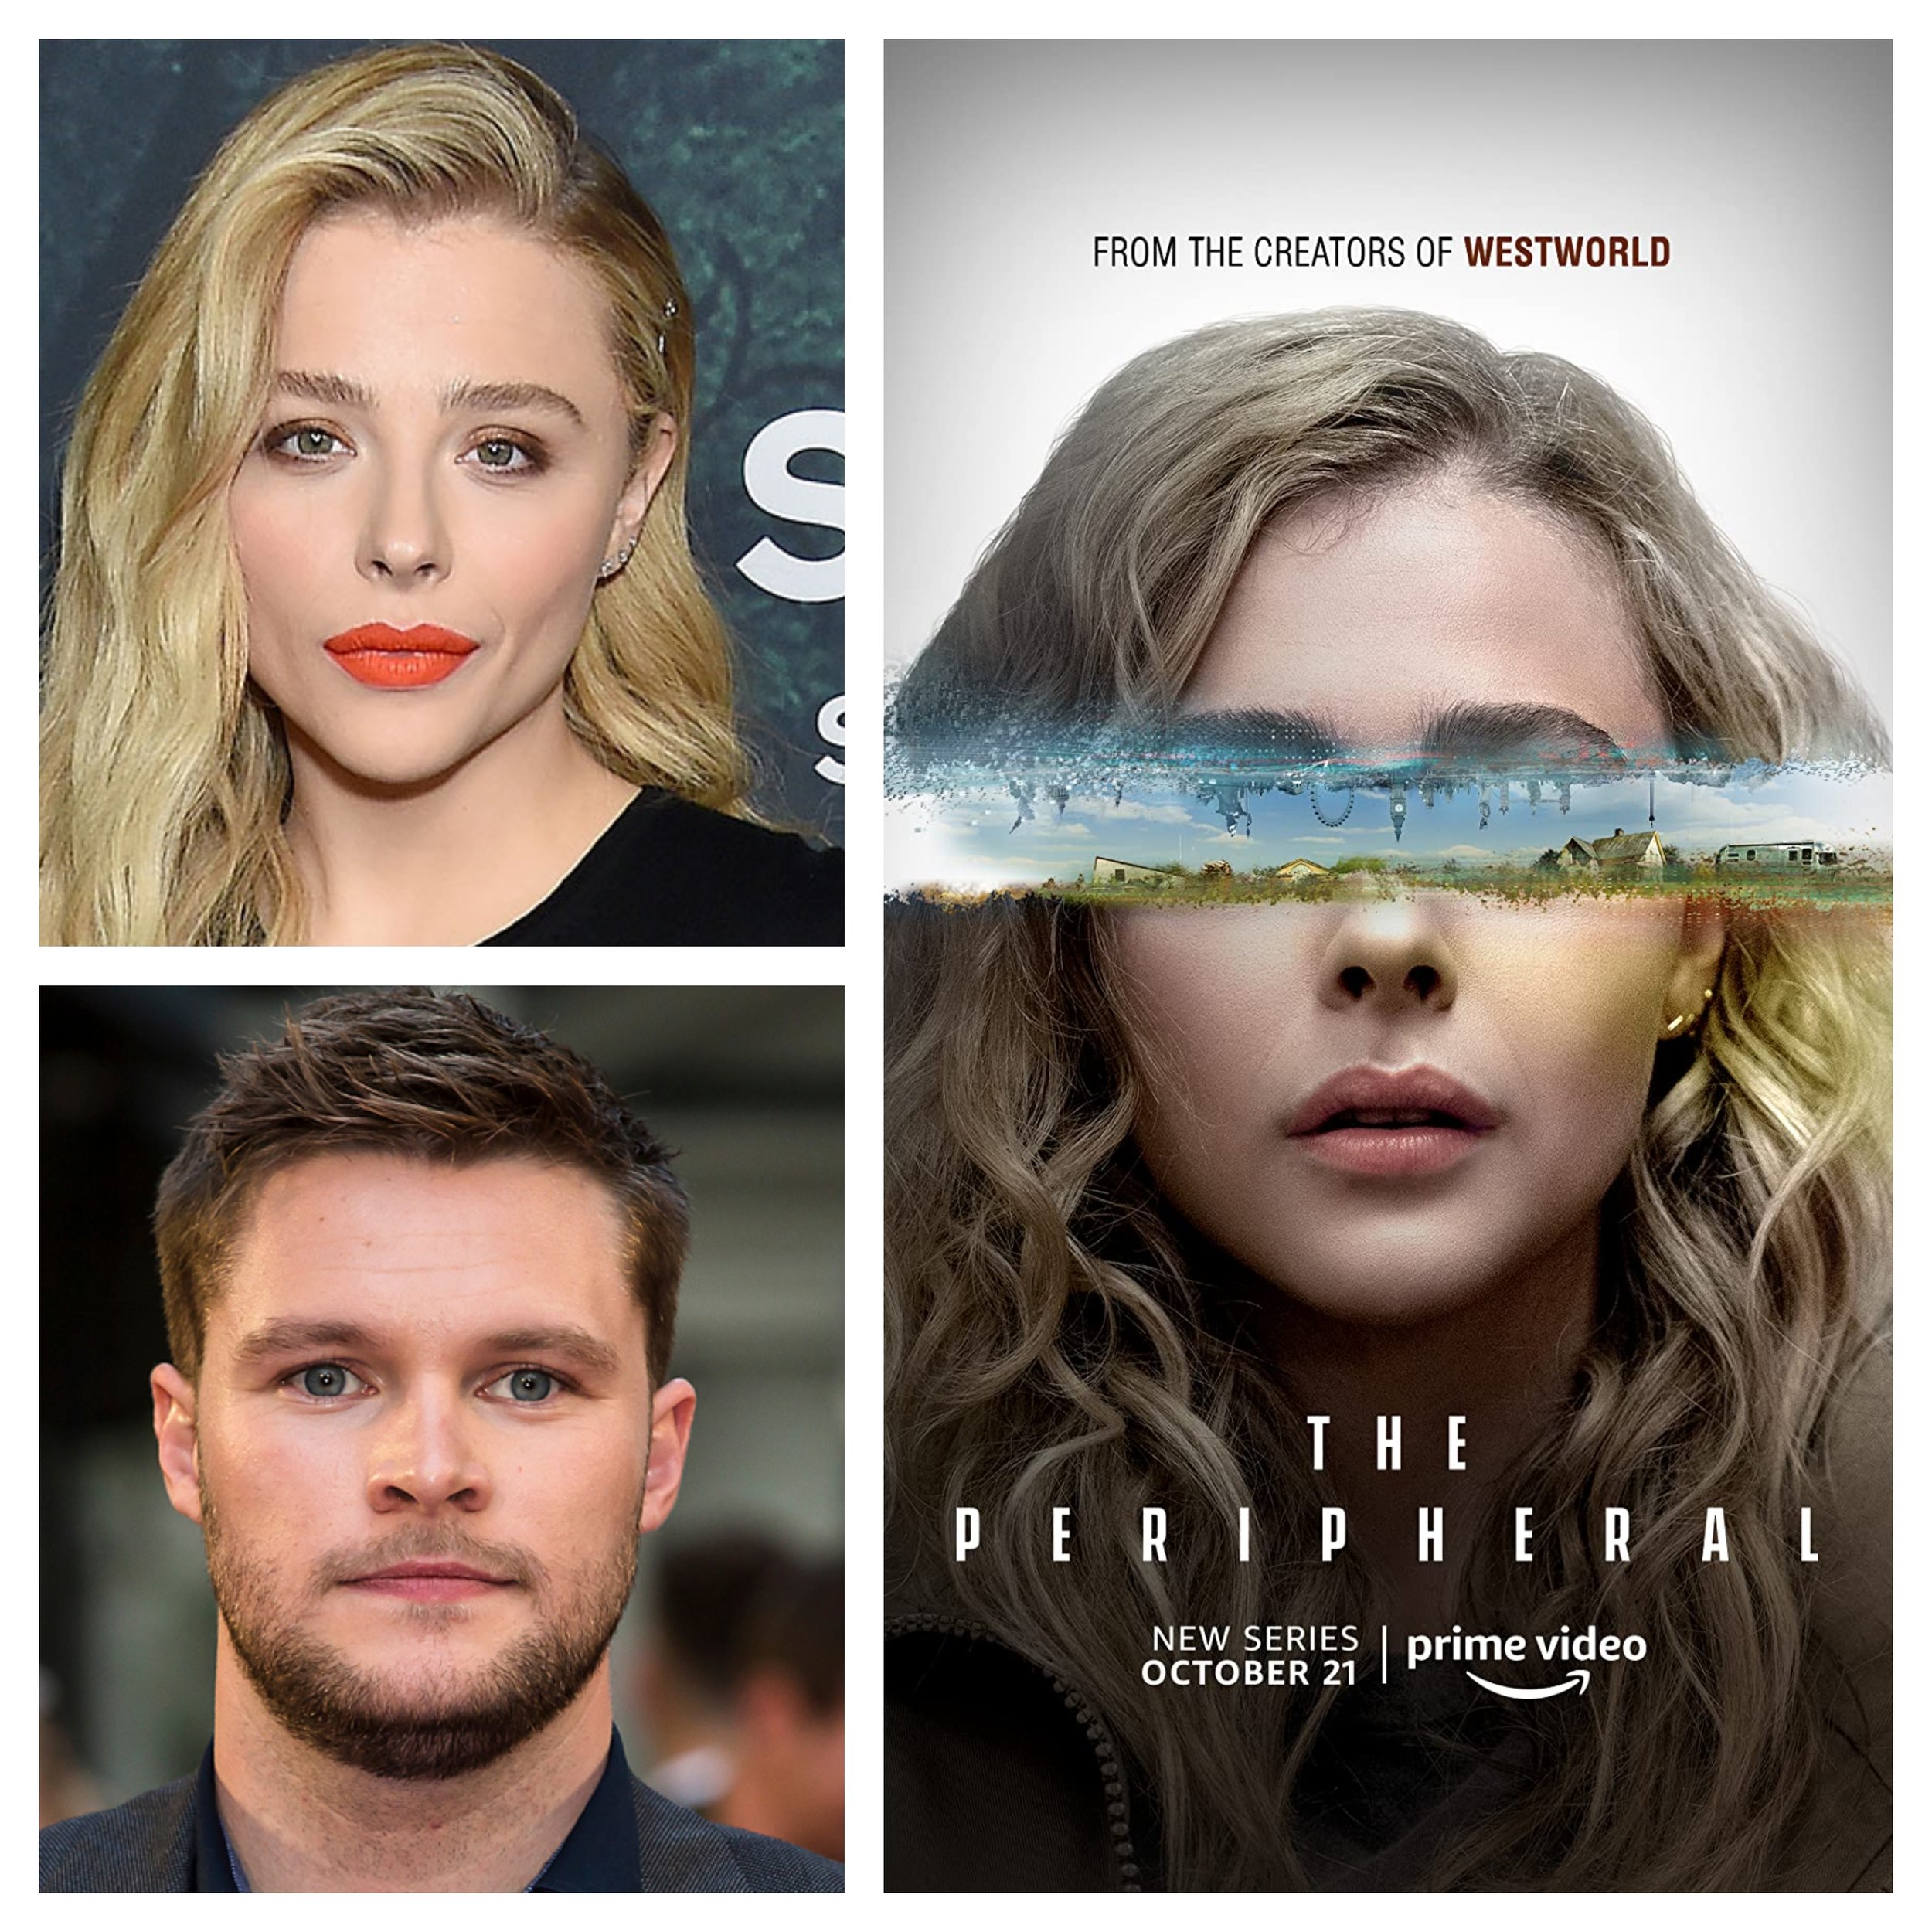 Chloë Grace Moretz and Jack Reynor are gamers in real life and in